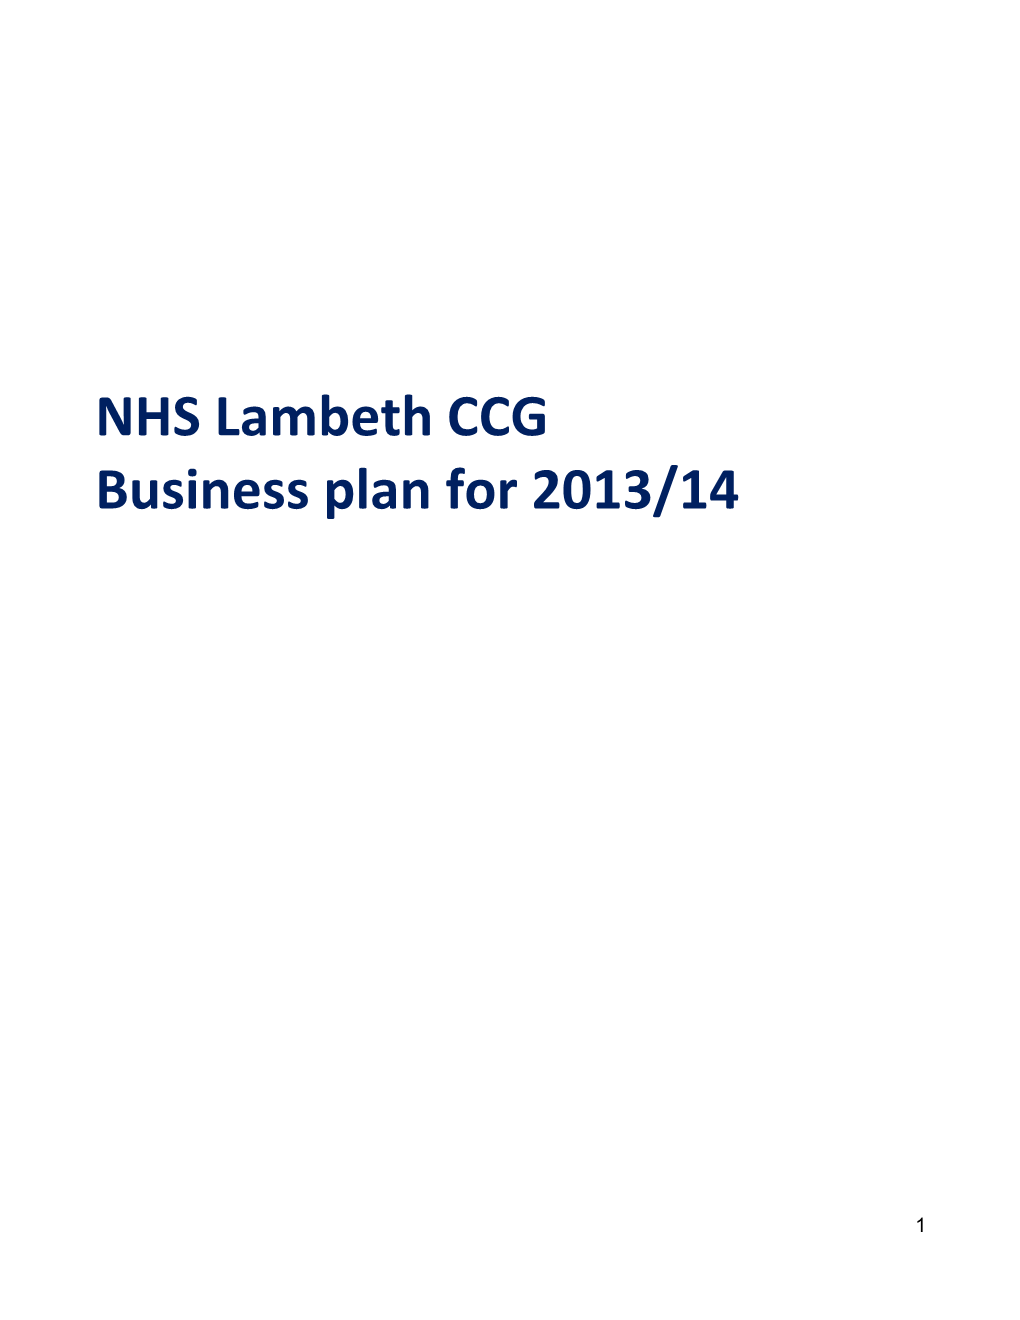 Business Plan for 2013/14